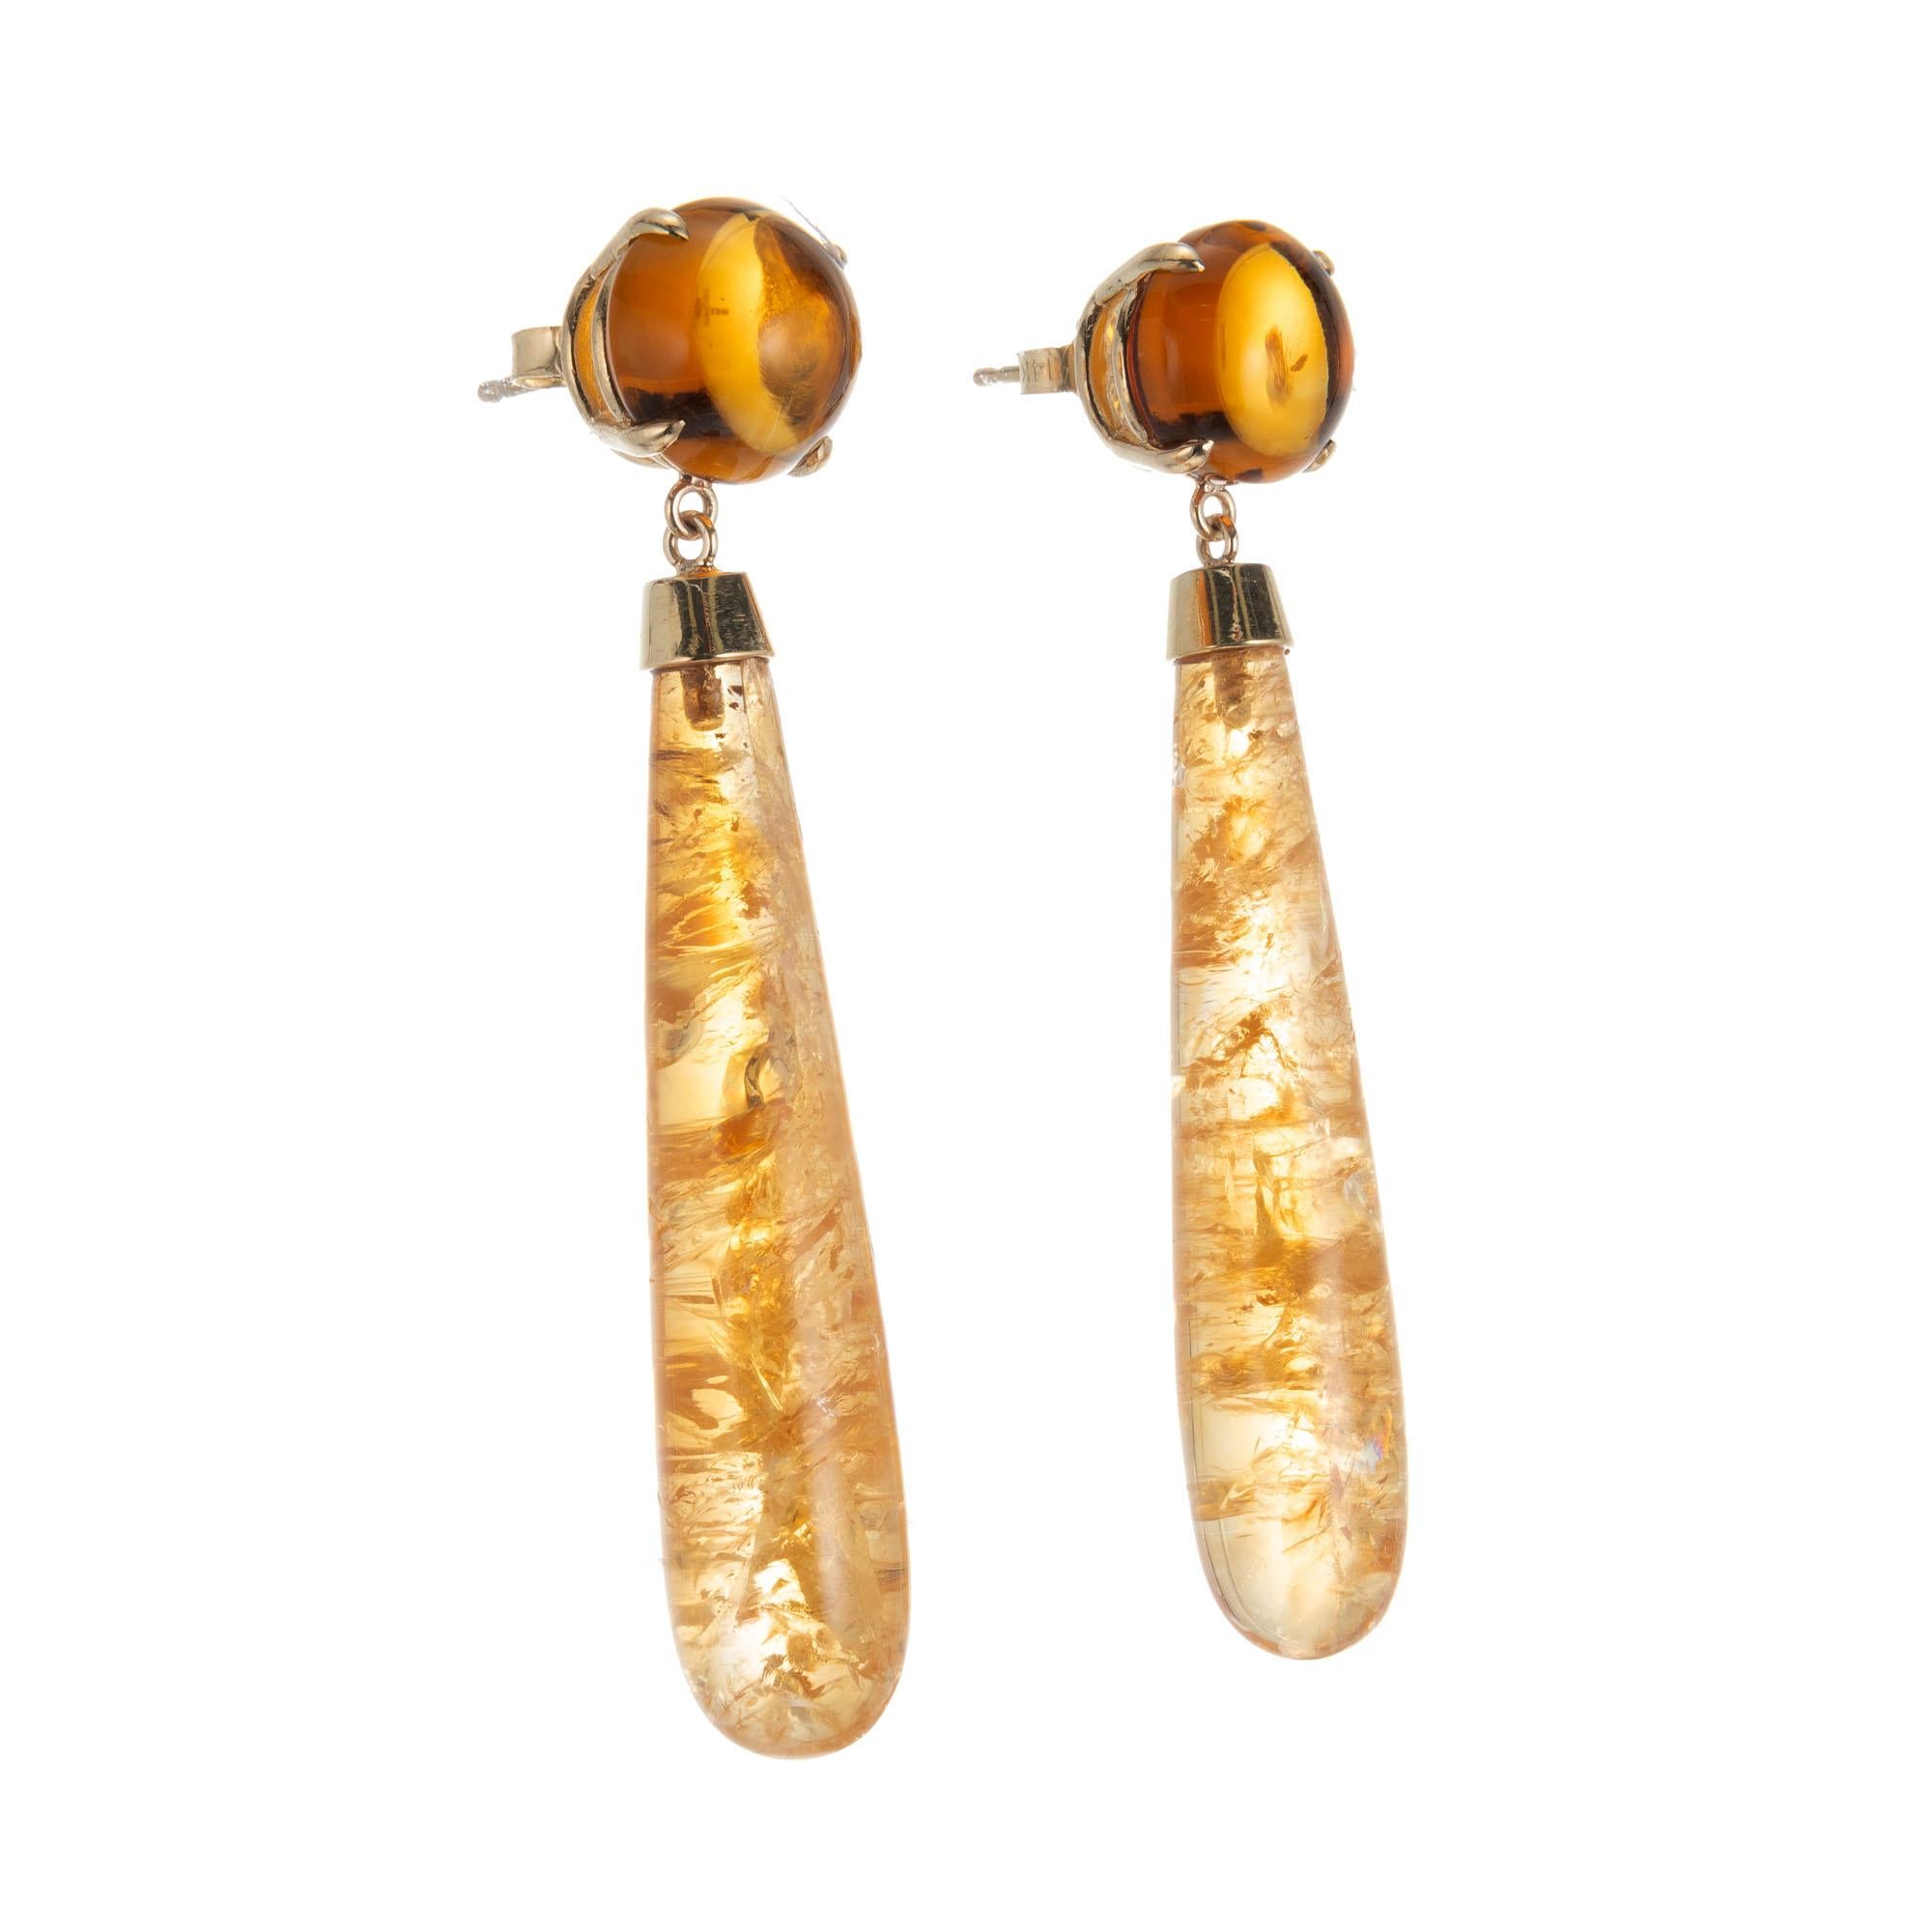 Natural untreated citrine dangle earrings. Set in 14k yellow gold, two round citrine tops with two cylinder dangles. Made in the Peter Suchy workshop

2 cabochon mottled orange citrine cylinder, approx. 41.1cts
2 round cabochon brownish orange